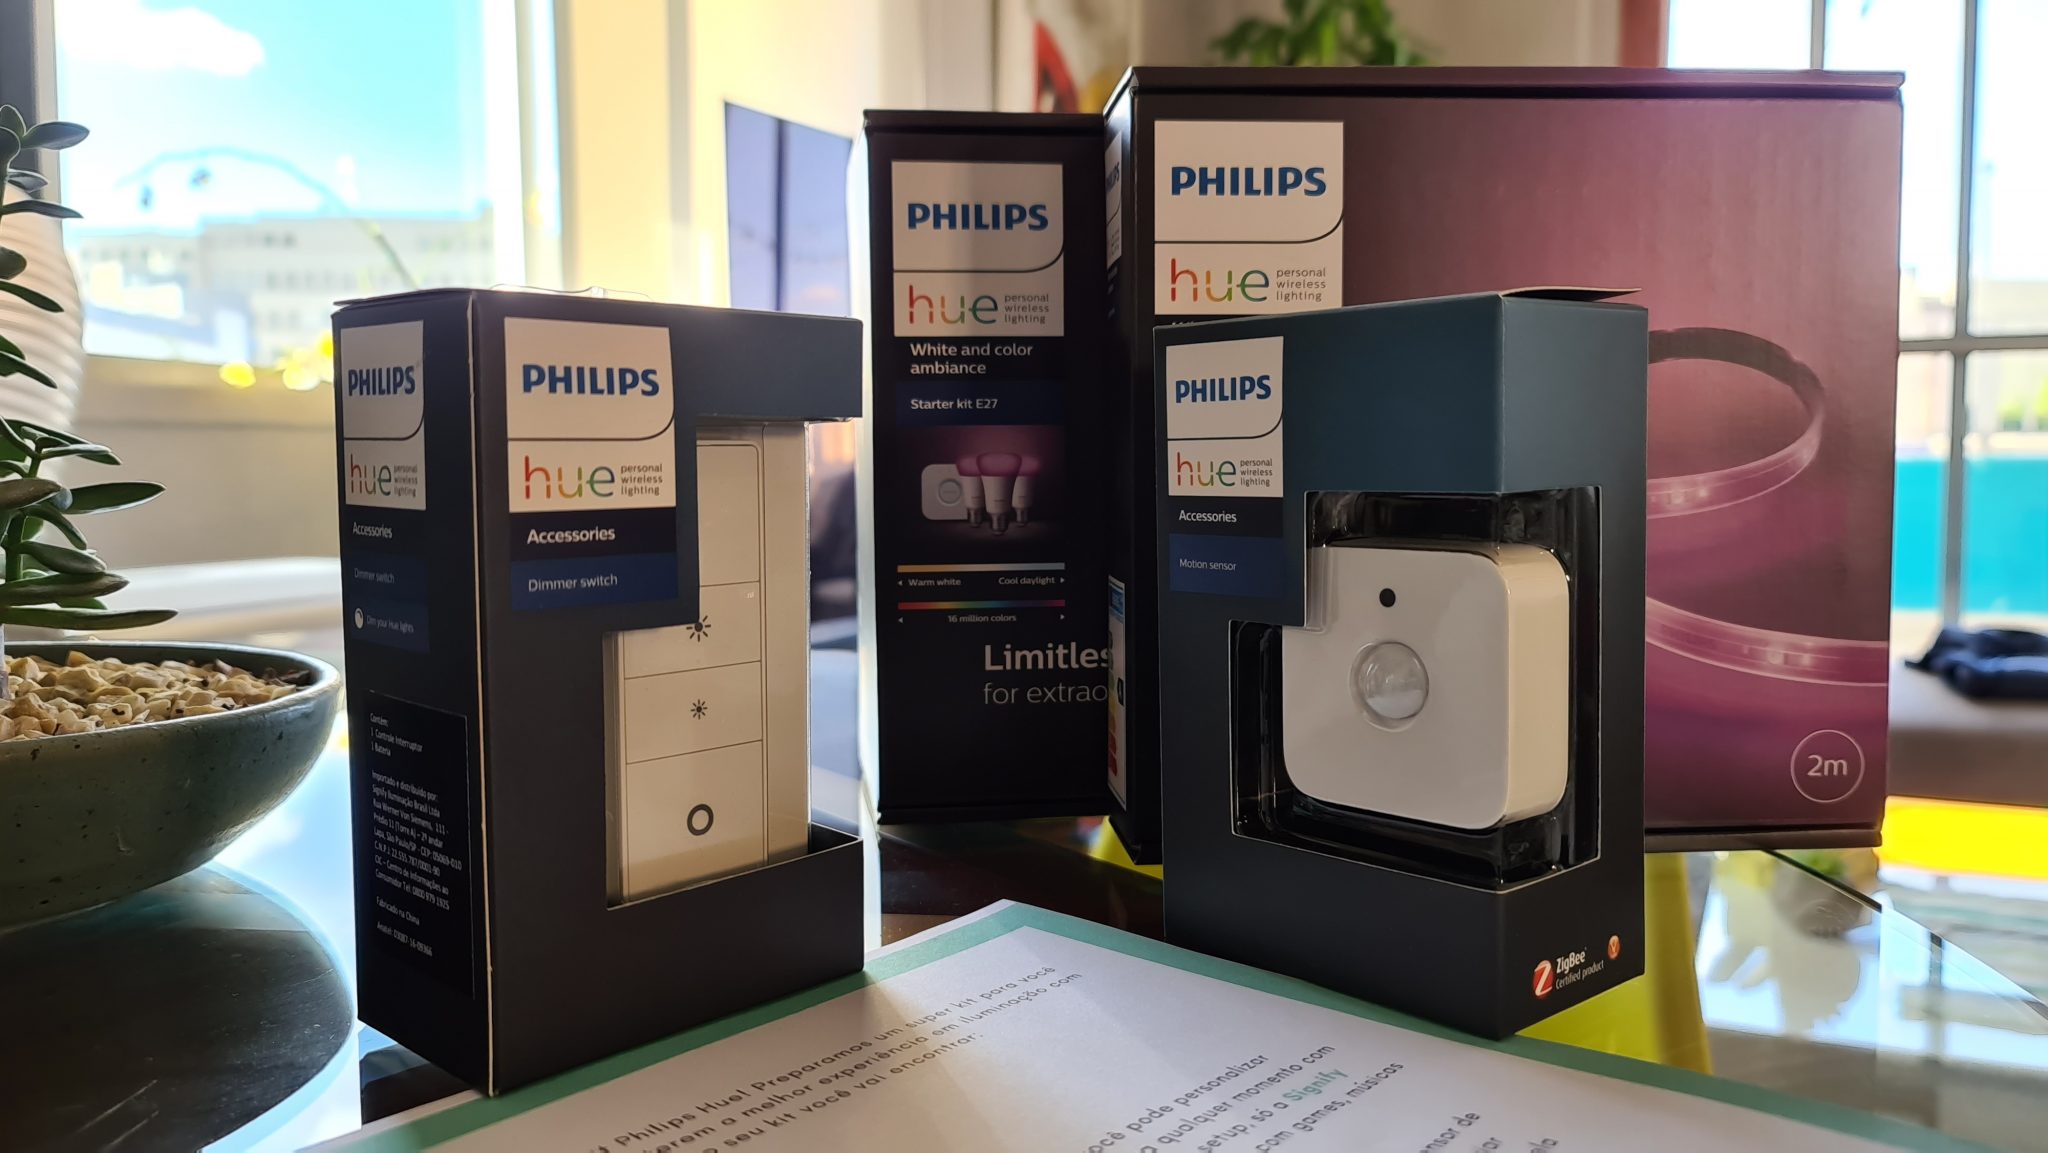 Learn more about Philips Hue's intelligent lighting